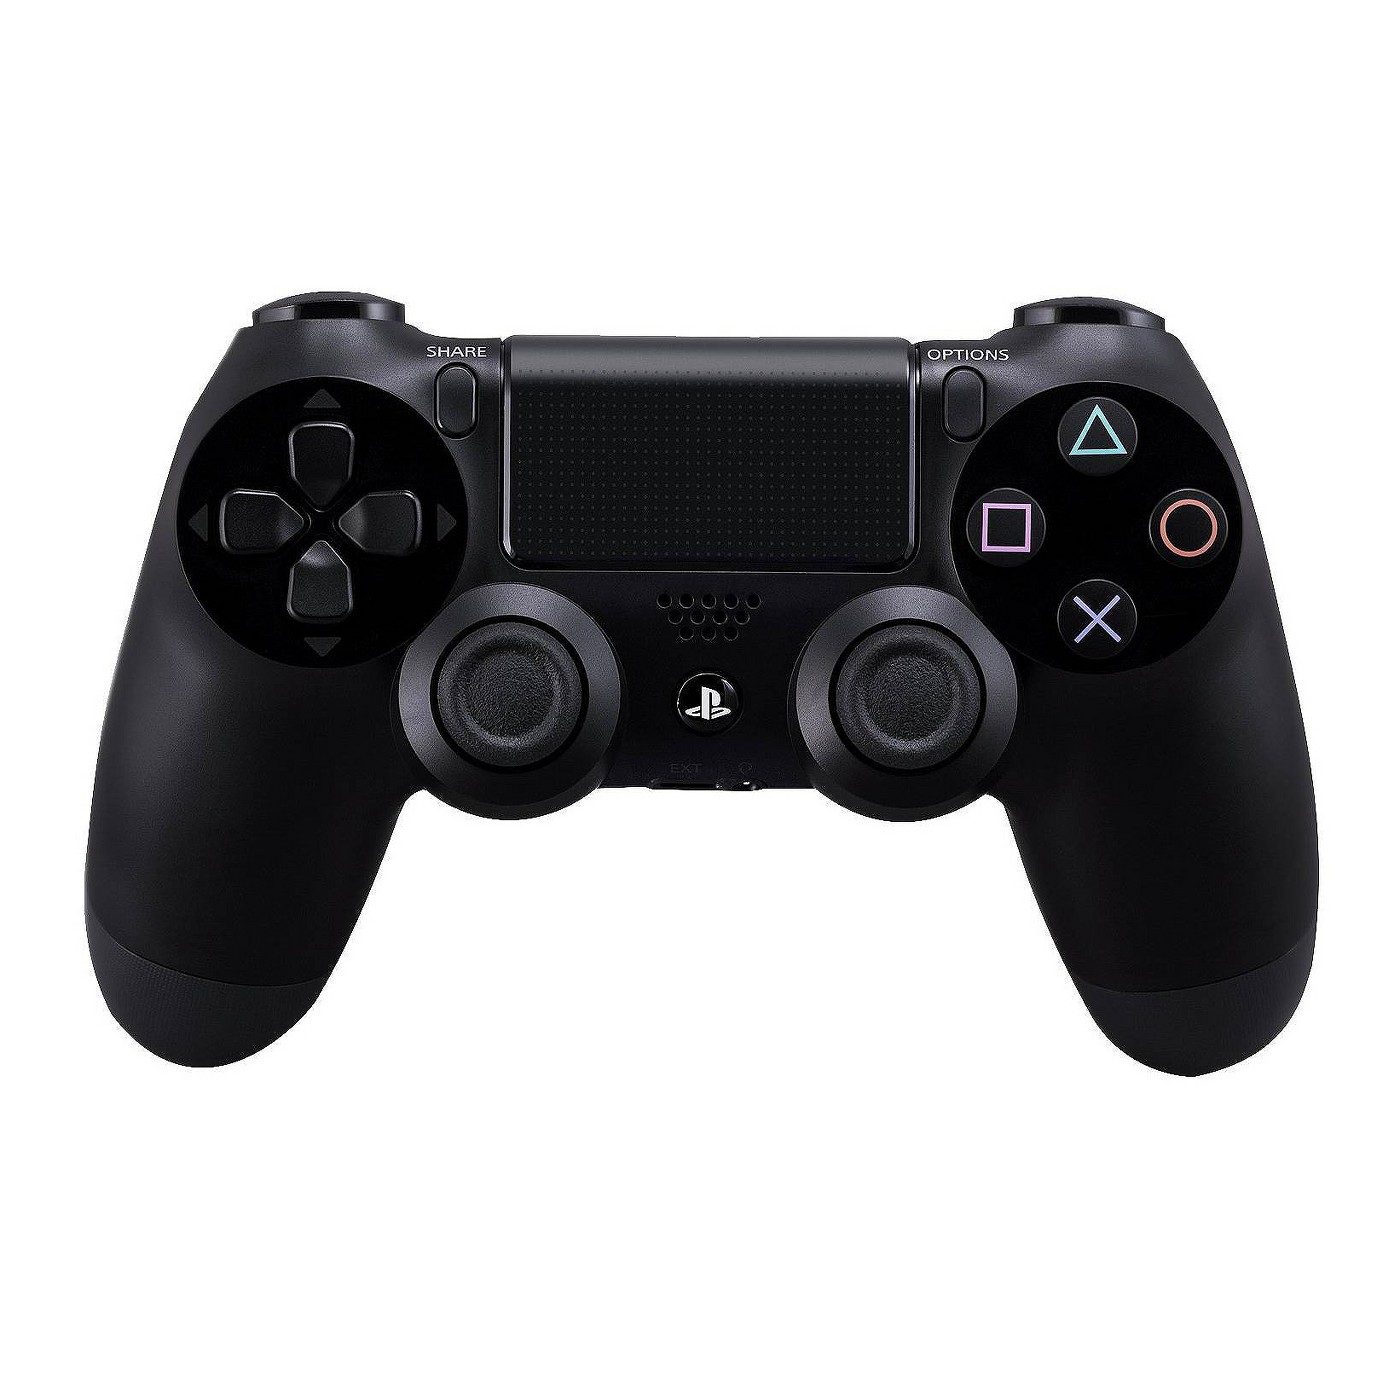 DualShock 4 Wireless Controller for PlayStation 4 - Black - image 1 of 6